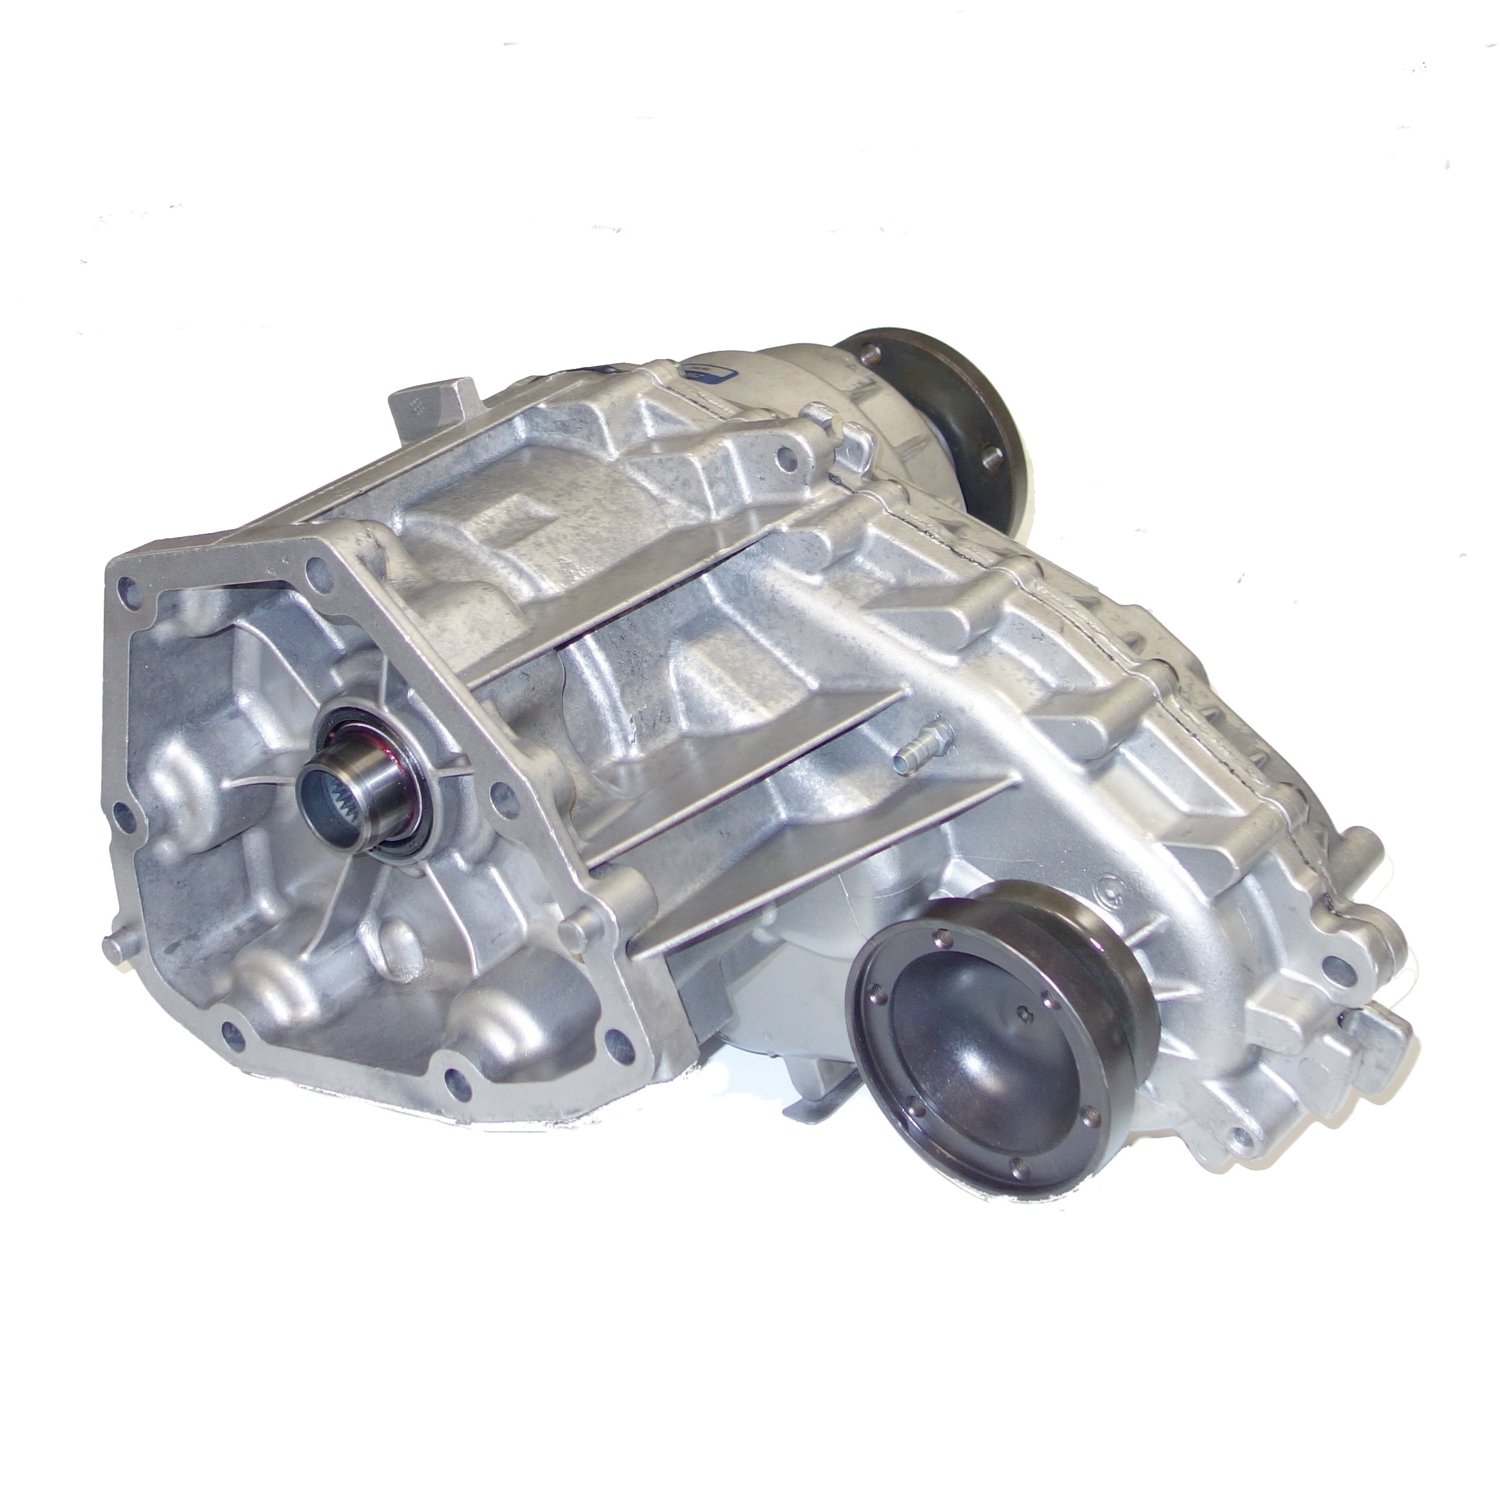 Remanufactured BW4412 Transfer Case for Ford 07-10 Explorer Sport Trac w/o Shift Motor